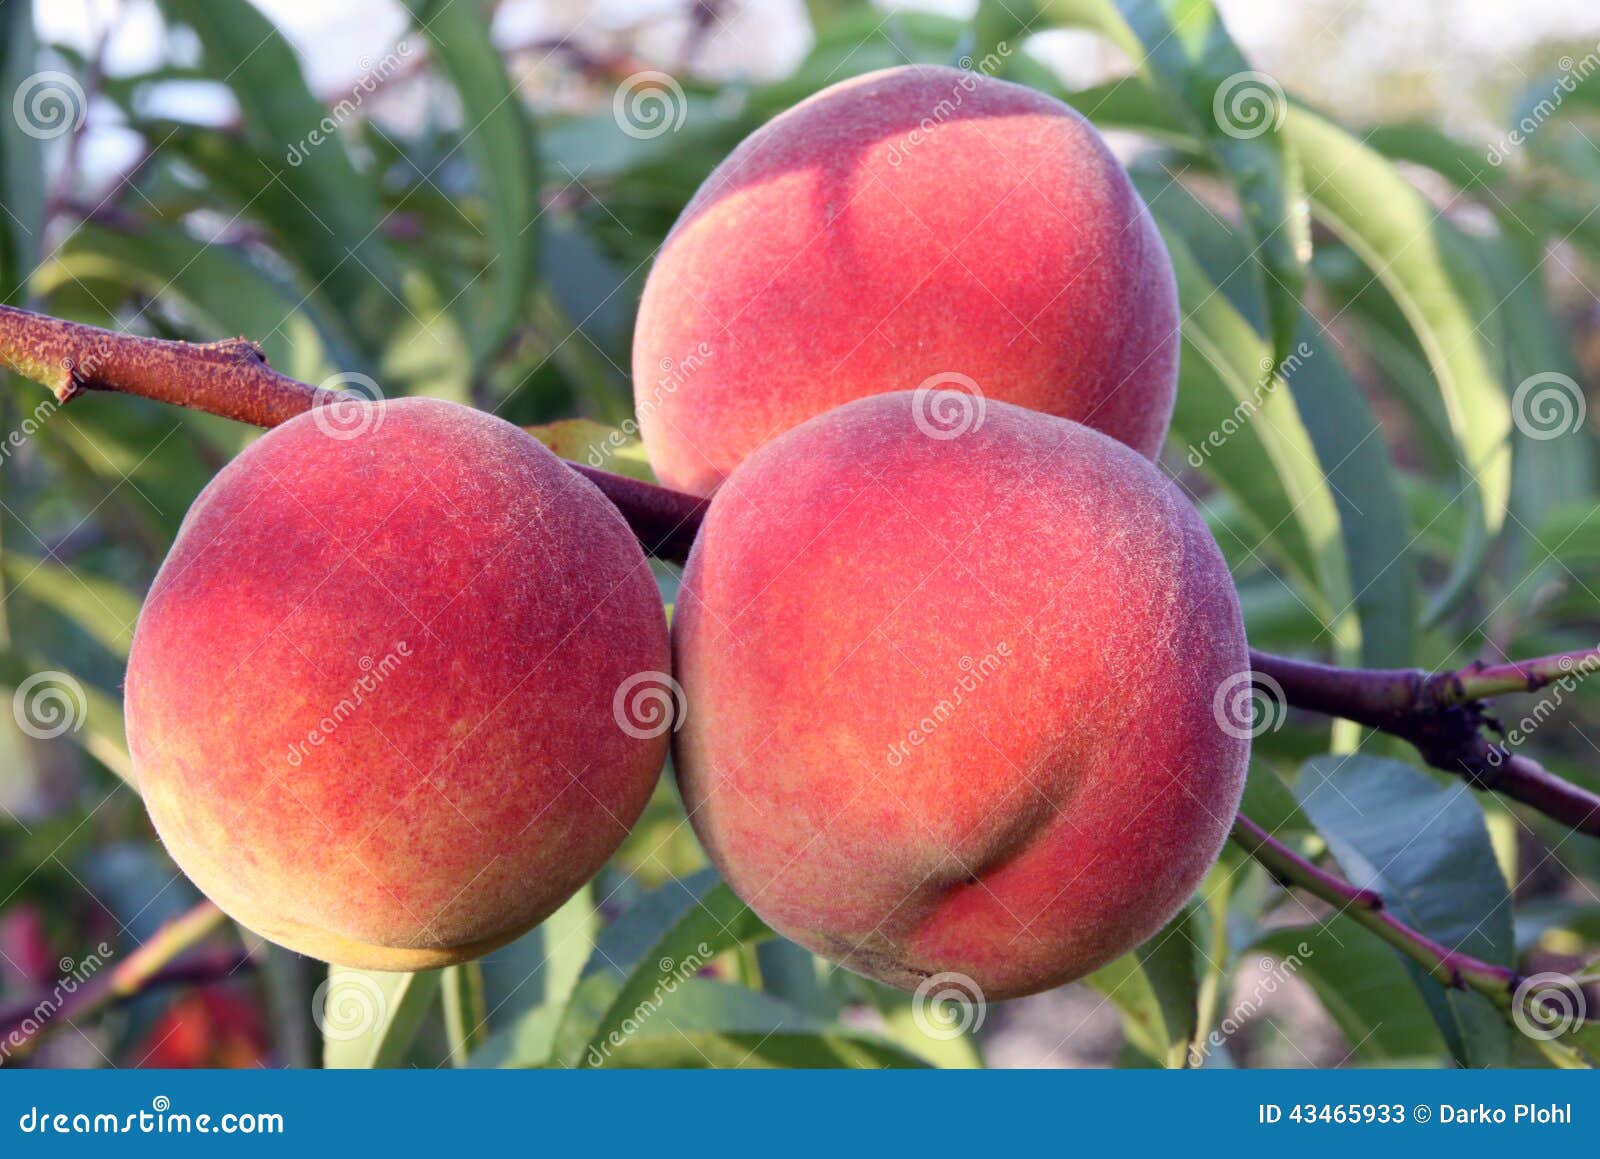 Fruit Red Peach on a Branch of the Tree Stock Image - Image of maturity,  autumn: 43465933